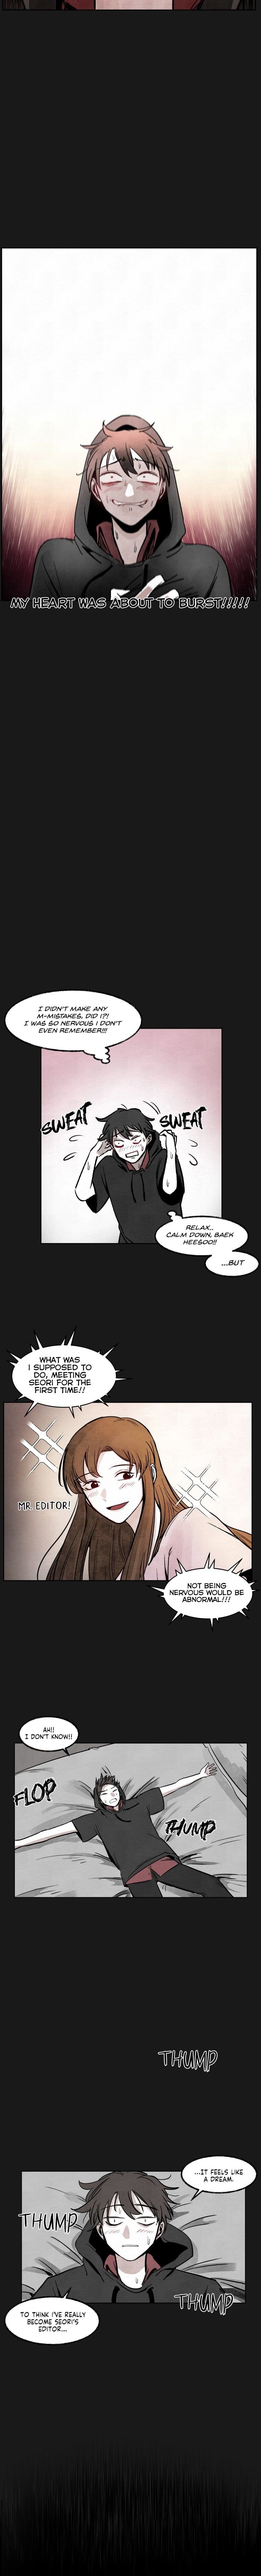 Devil’s Editing Chapter 1 - Page 8